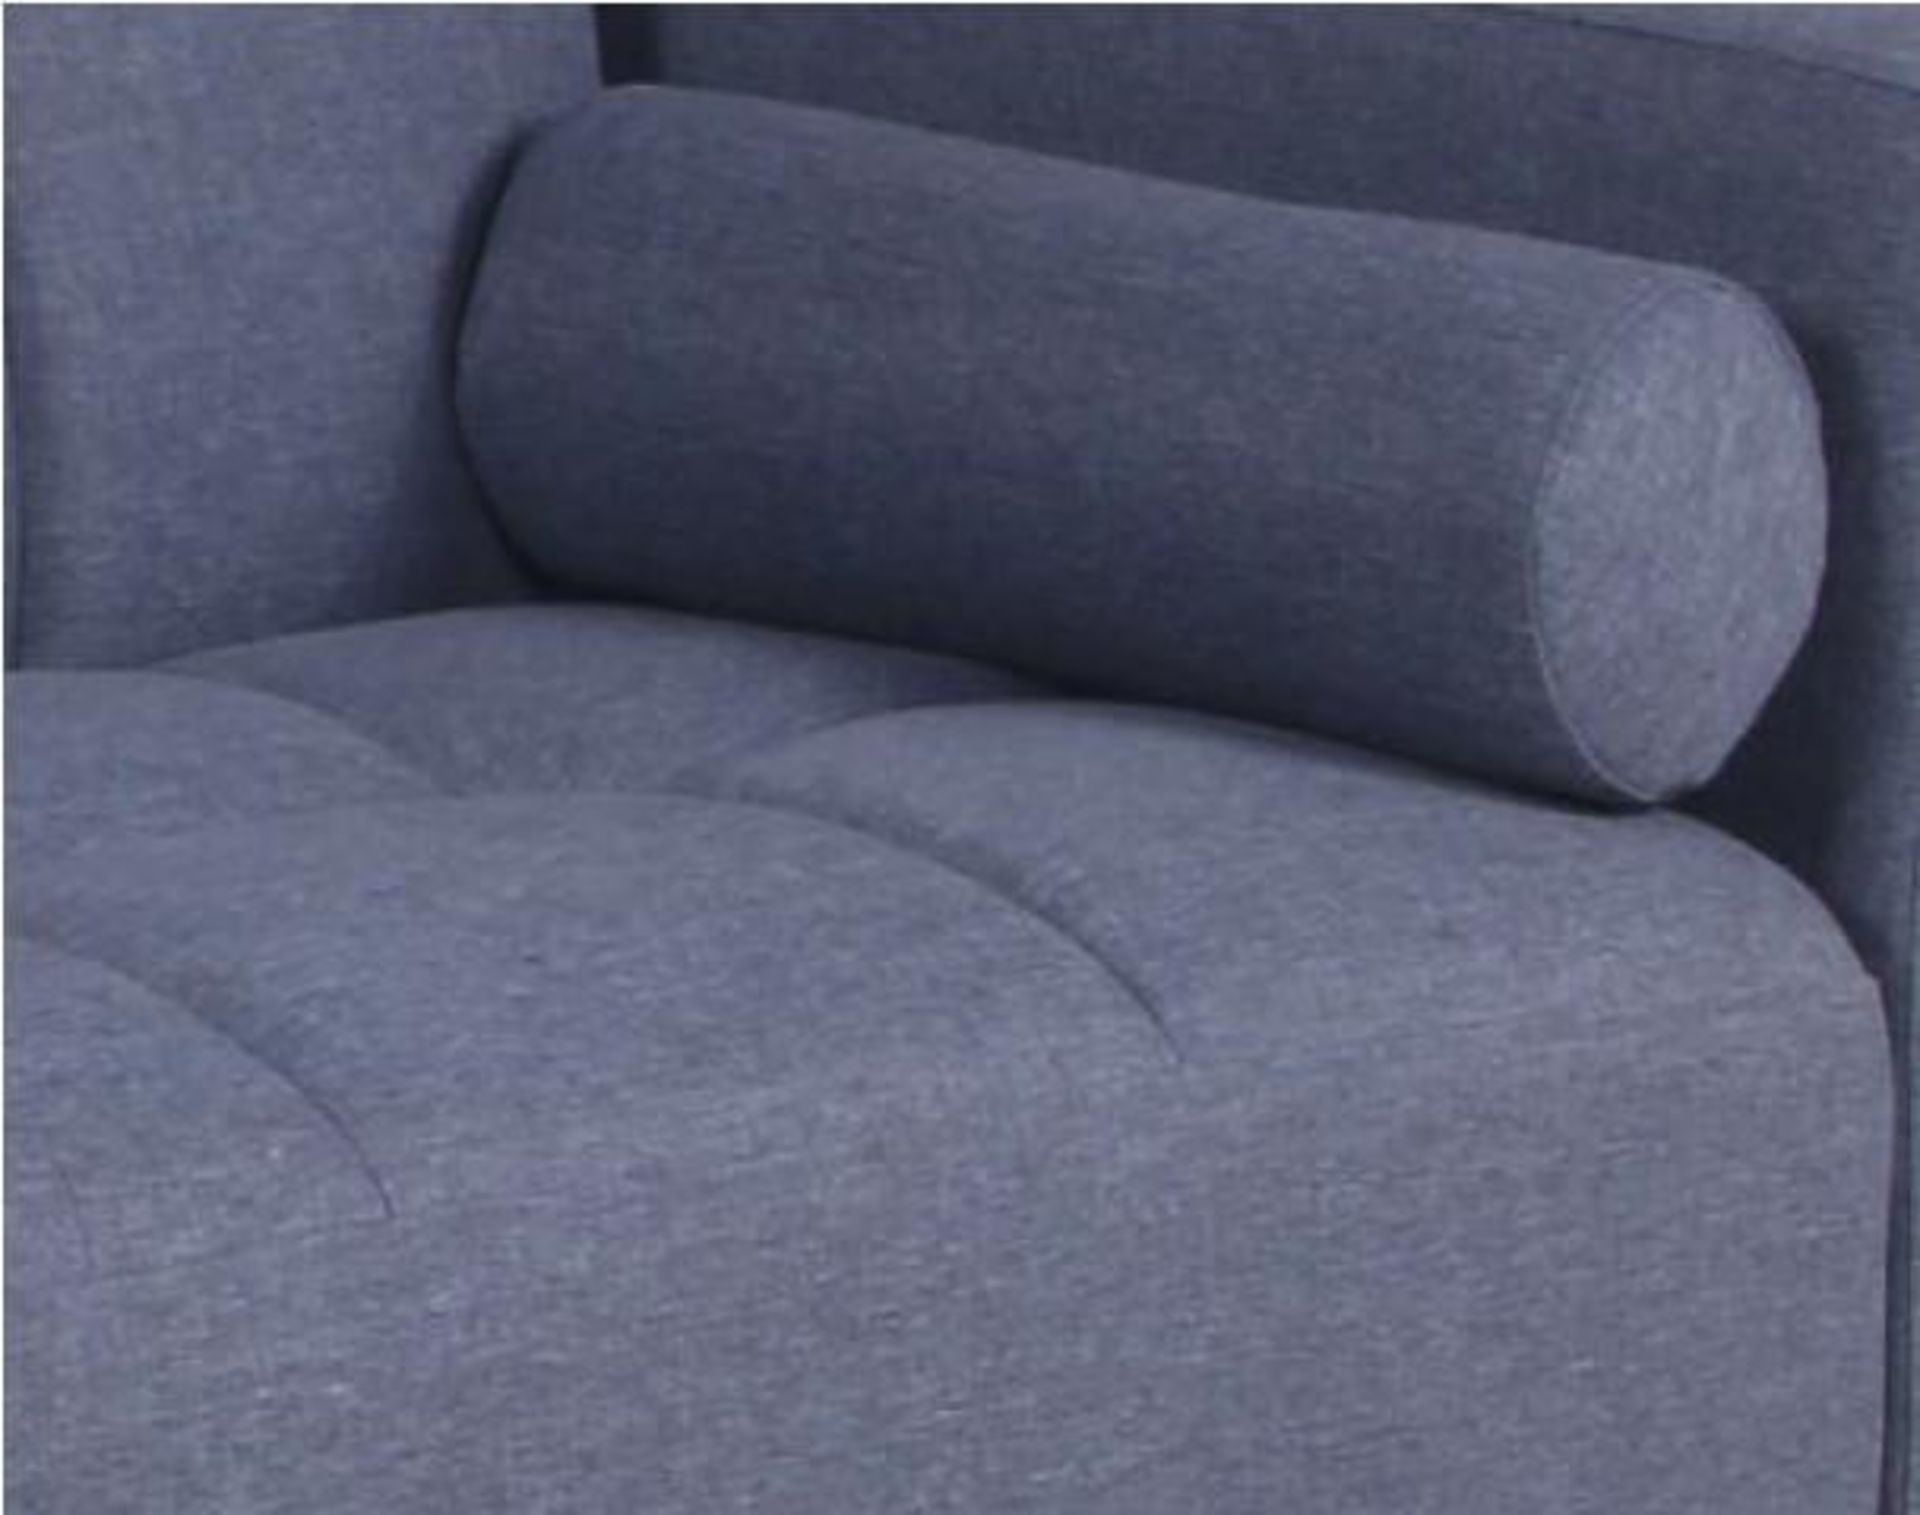 *BRAND NEW* Heavy Duty Clic Clac sofa bed with 2 bolsters, dual usb & charger socket. - Image 10 of 11